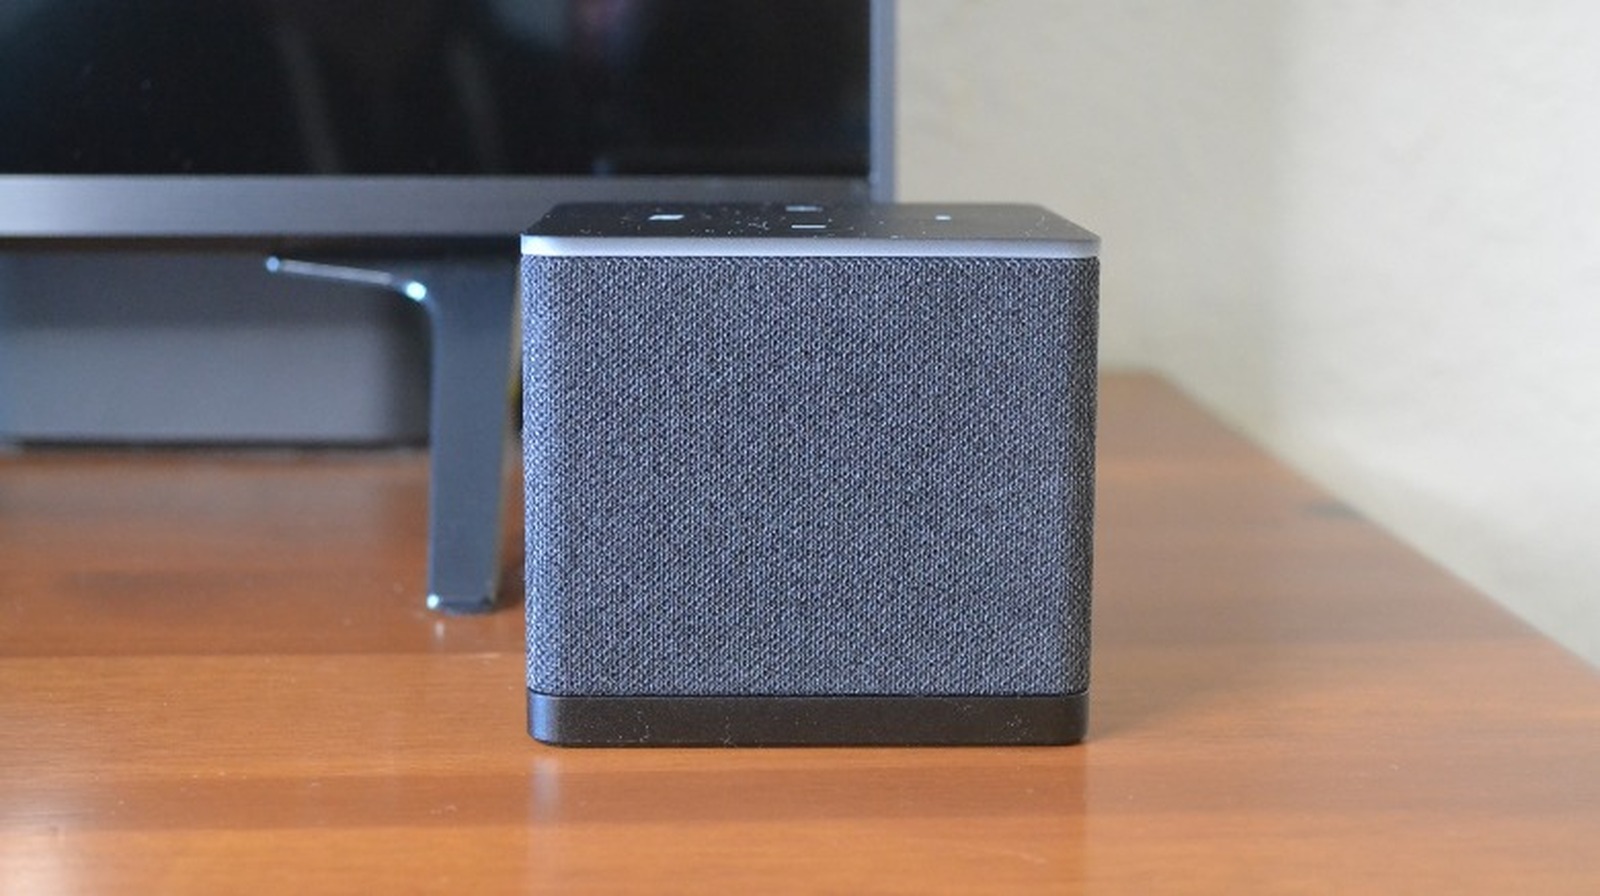 Fire TV Cube (3rd Gen) Review: Power, Smarts, And Clutter